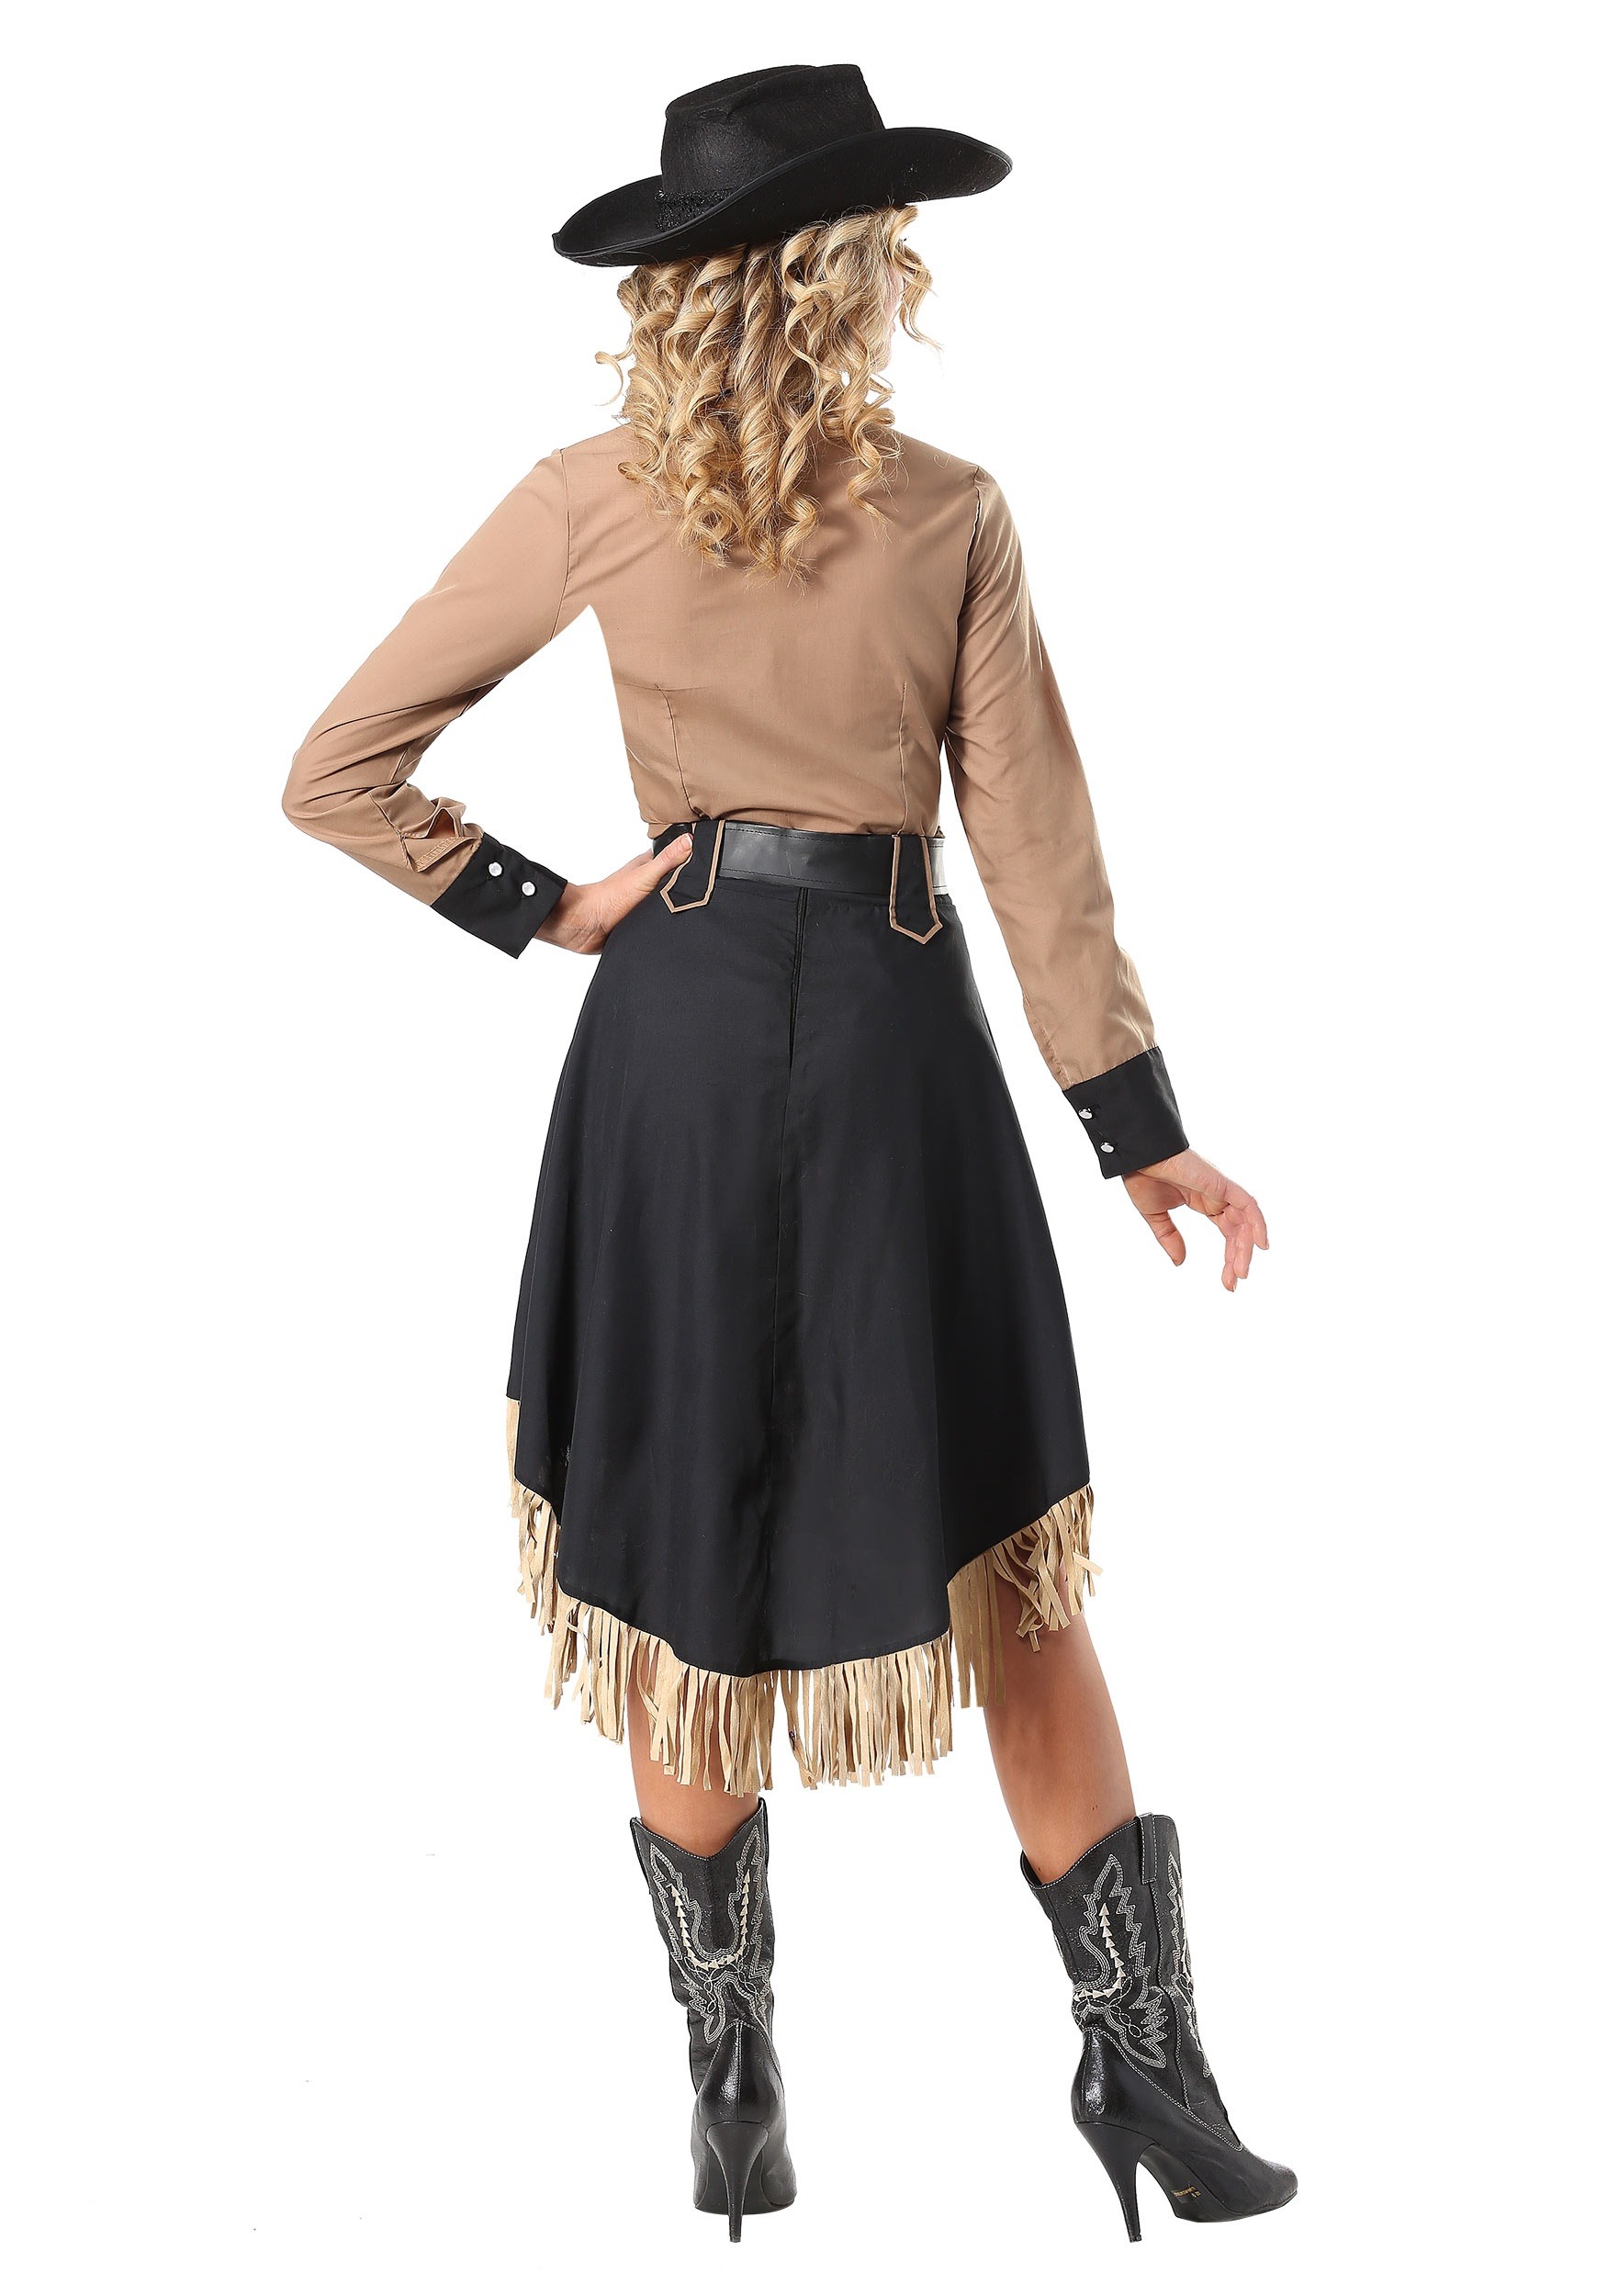 Lasson Cowgirl Costume For Women Western Costume Exclusive 